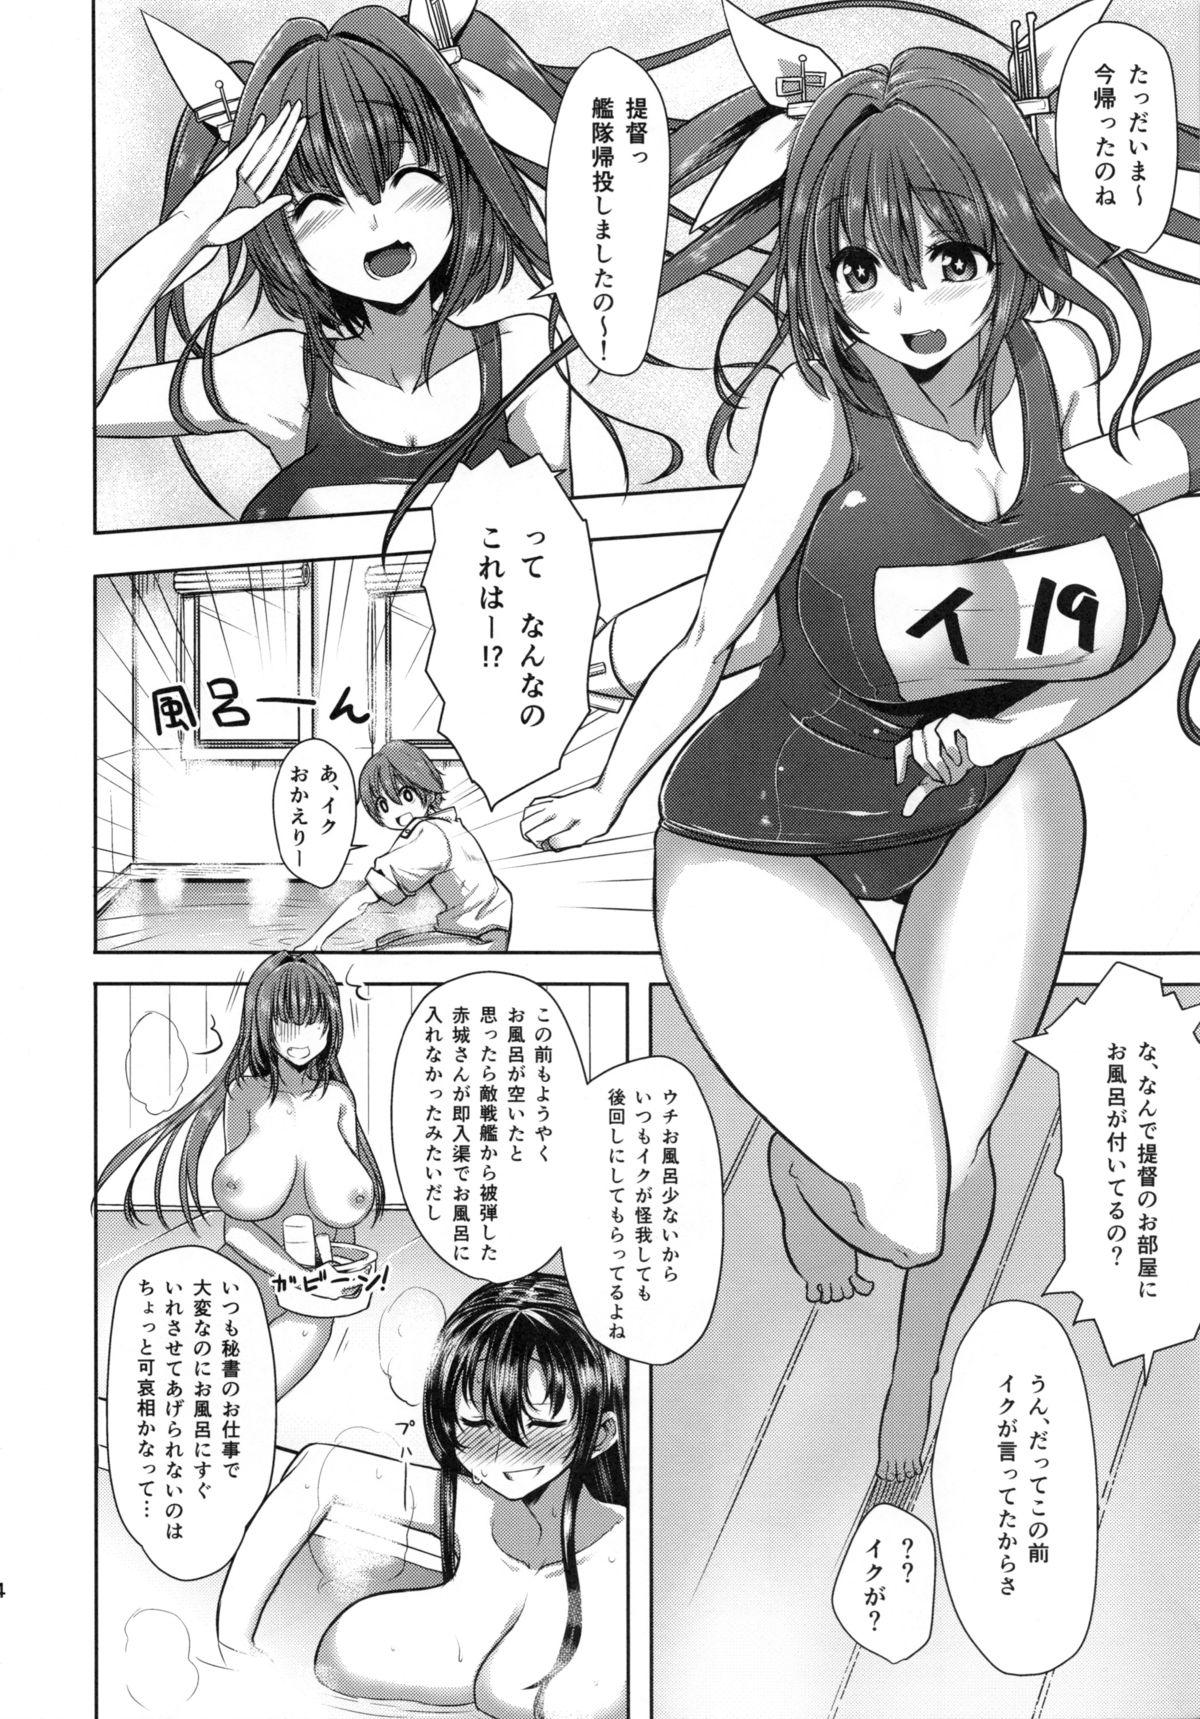 Porn Blow Jobs I-19 to Icchau?? - Kantai collection Camsex - Page 3